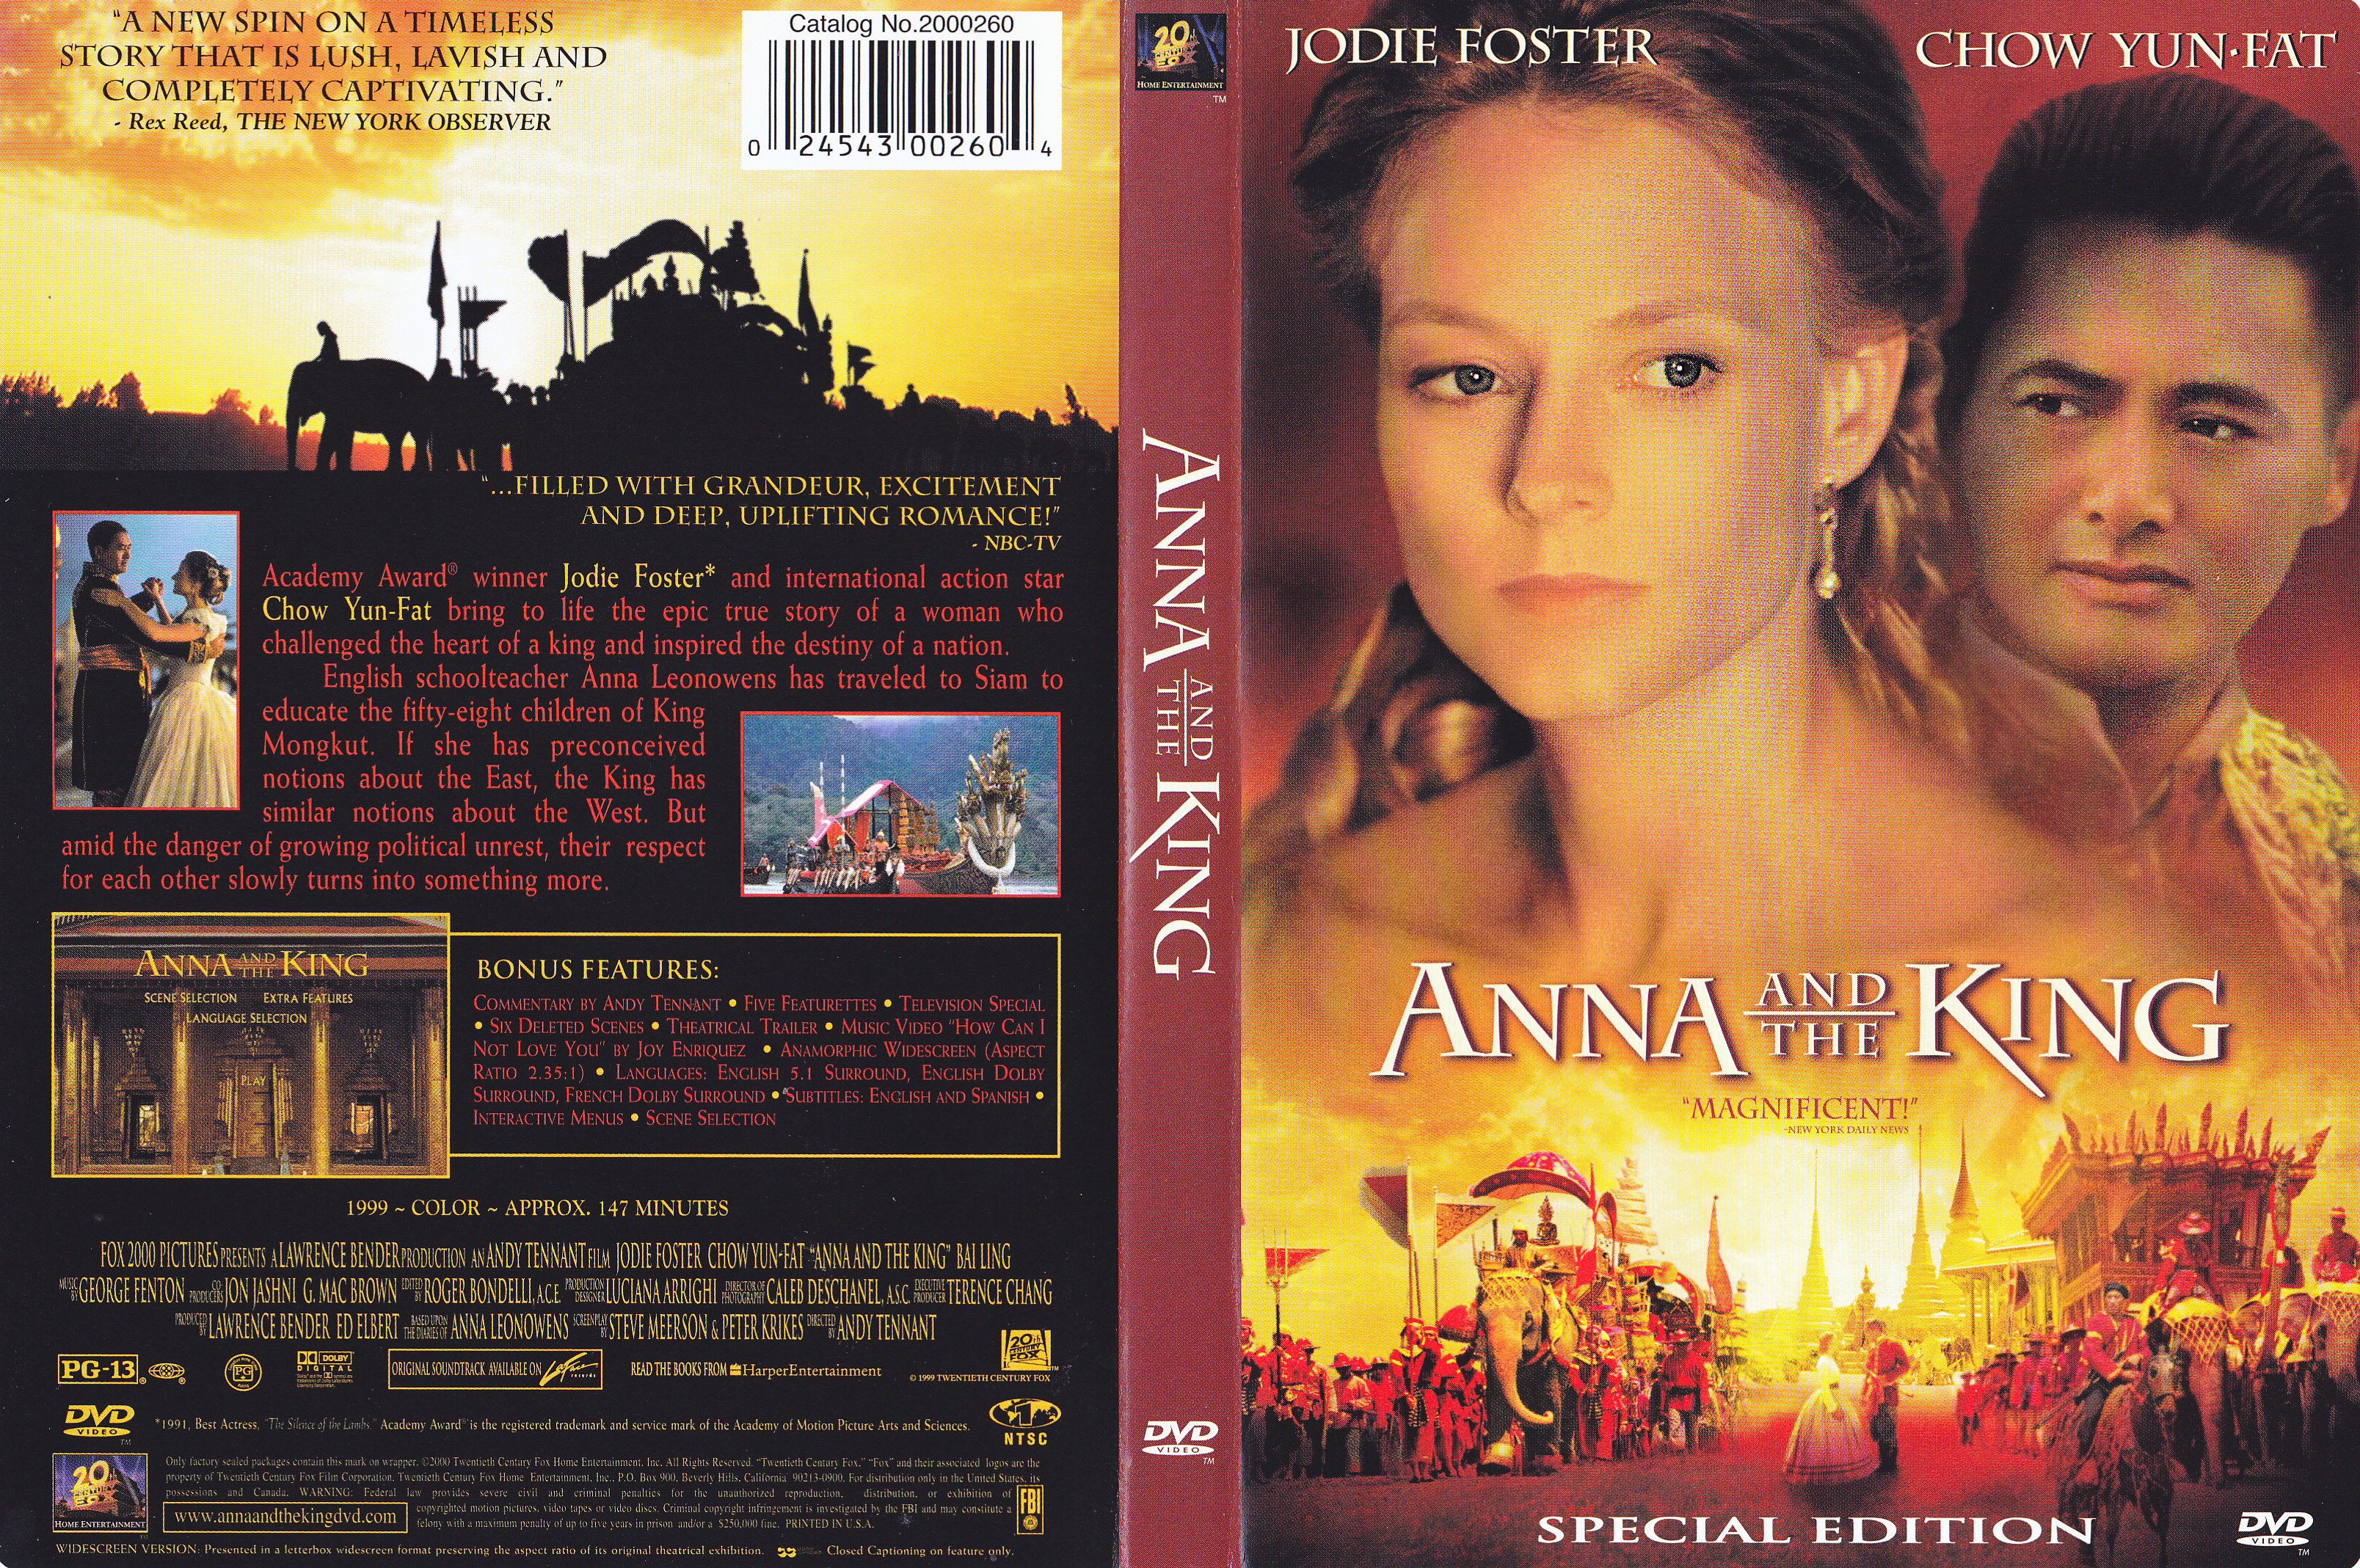 Jaquette DVD Anna and the king - Anna et le roi Zone 1